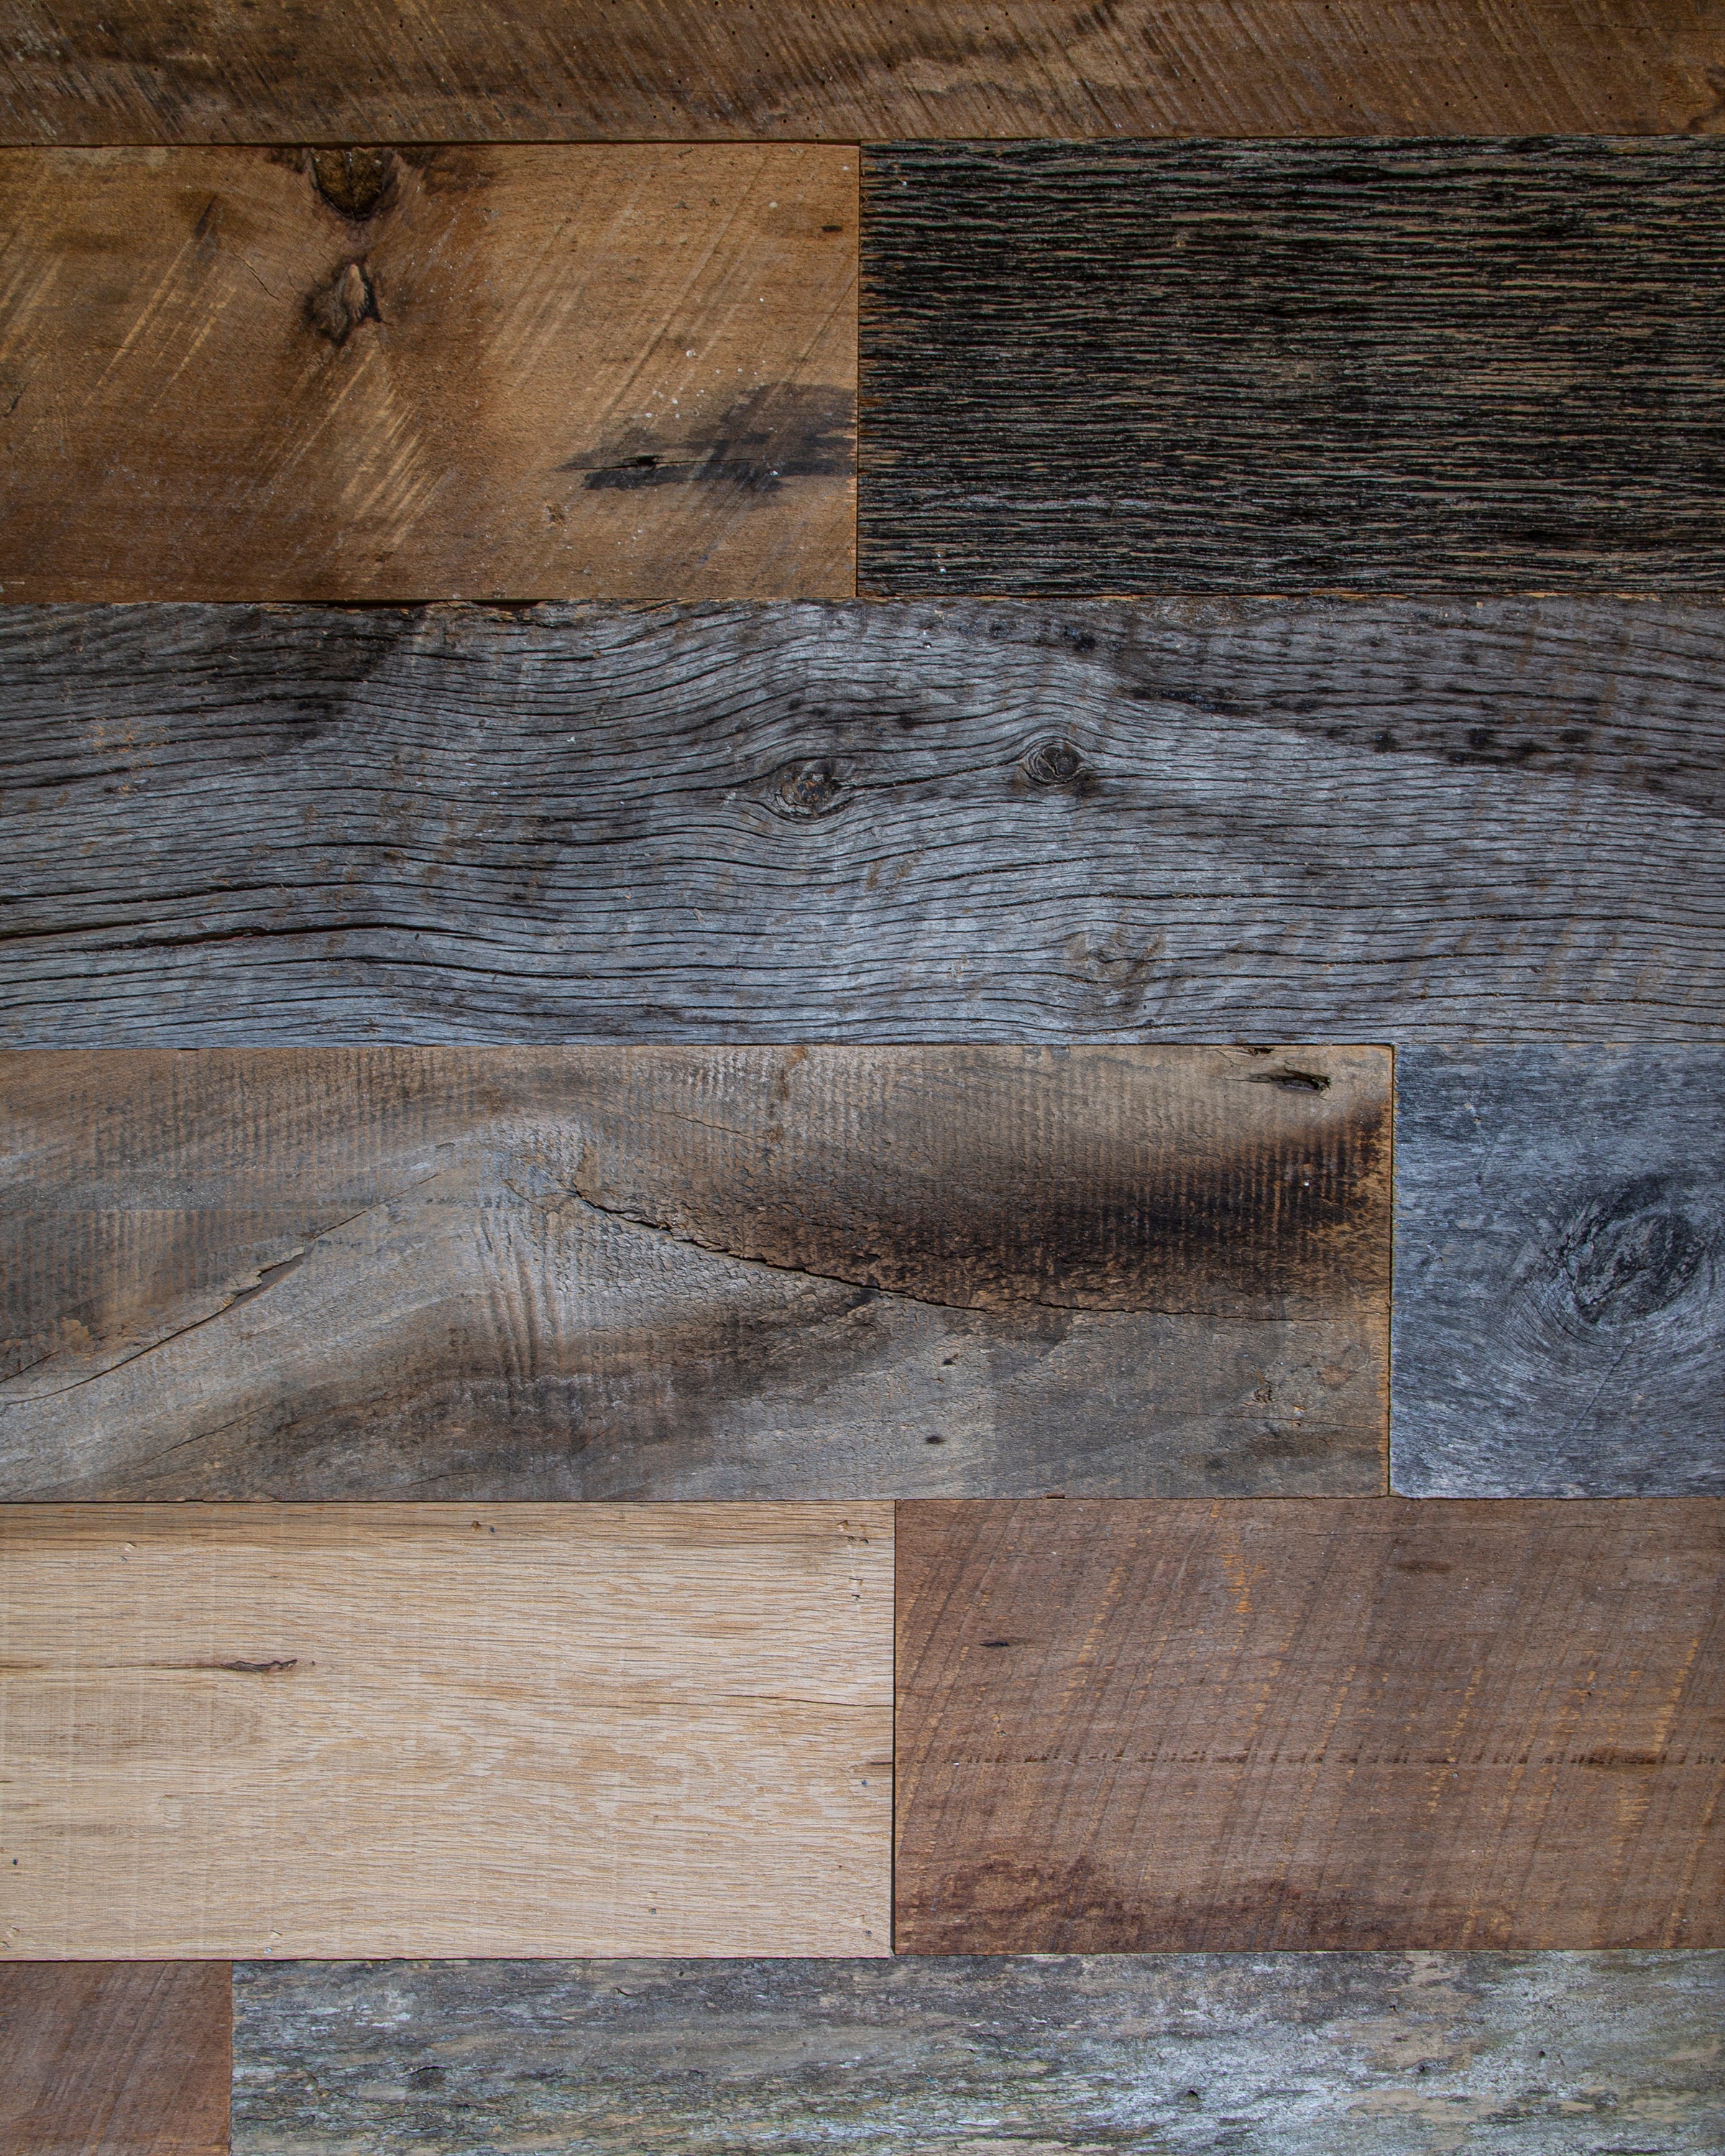 Reclaimed Split Wood Plank Bundle for DIY Projects Craft Wood Pack of 6  0.25 Planks Multiple Lengths Available 